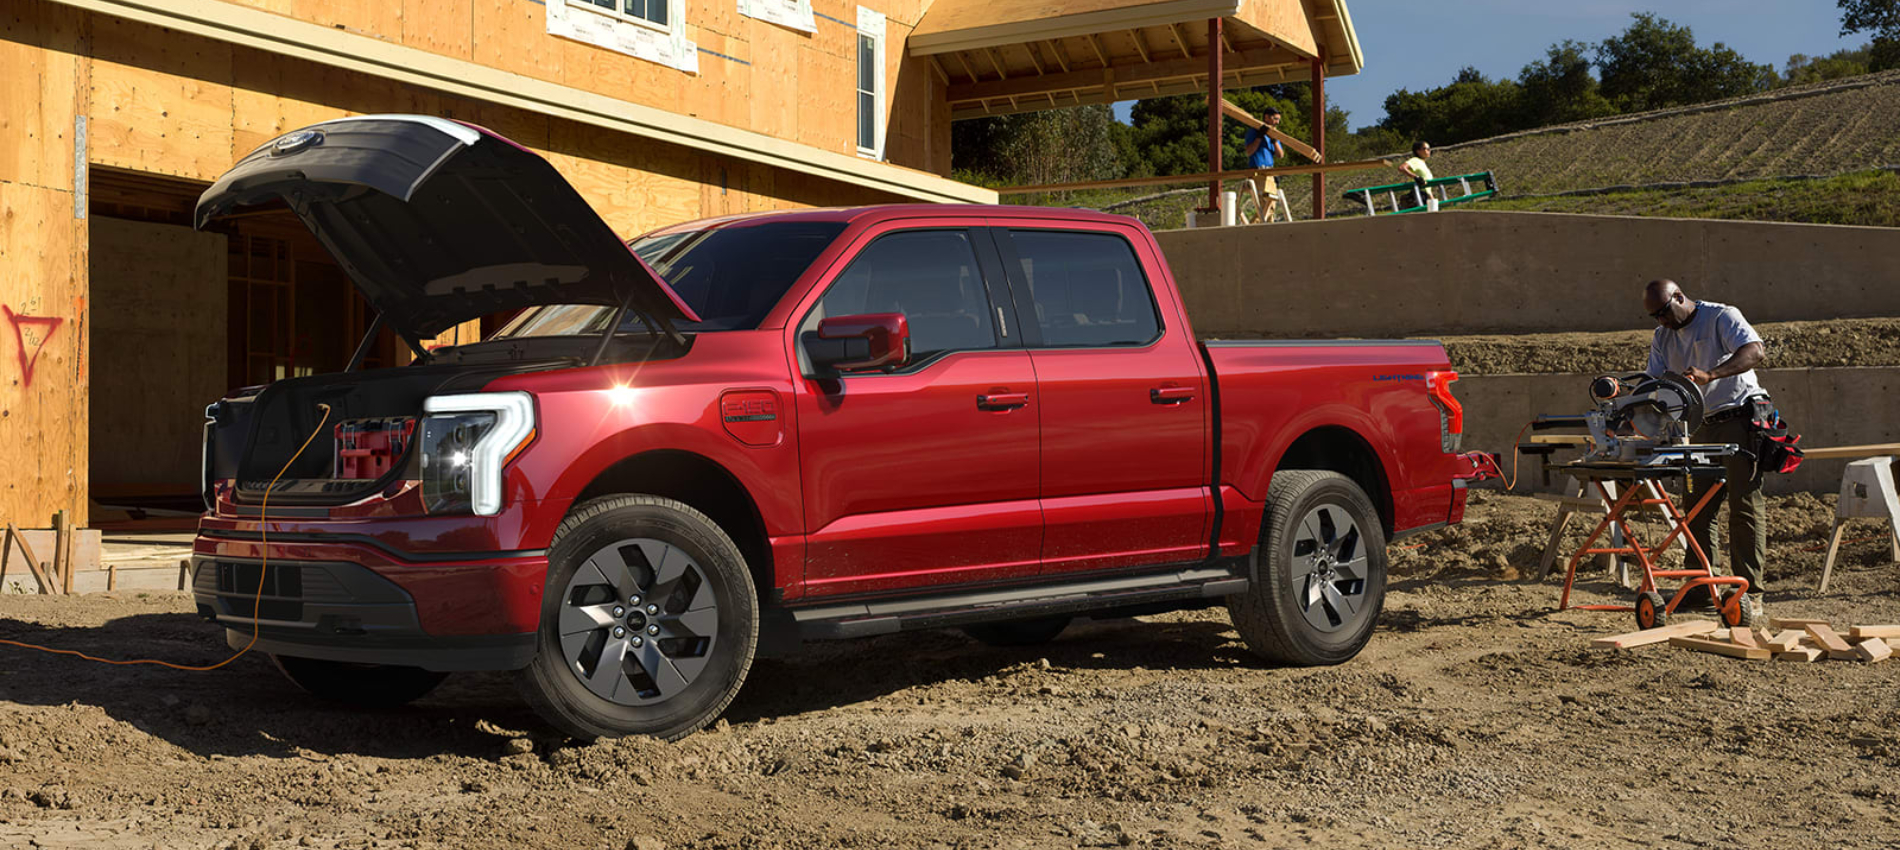 The Electric F-150 Lightning | Latest News - The Electric F-150 Lightning | Latest News